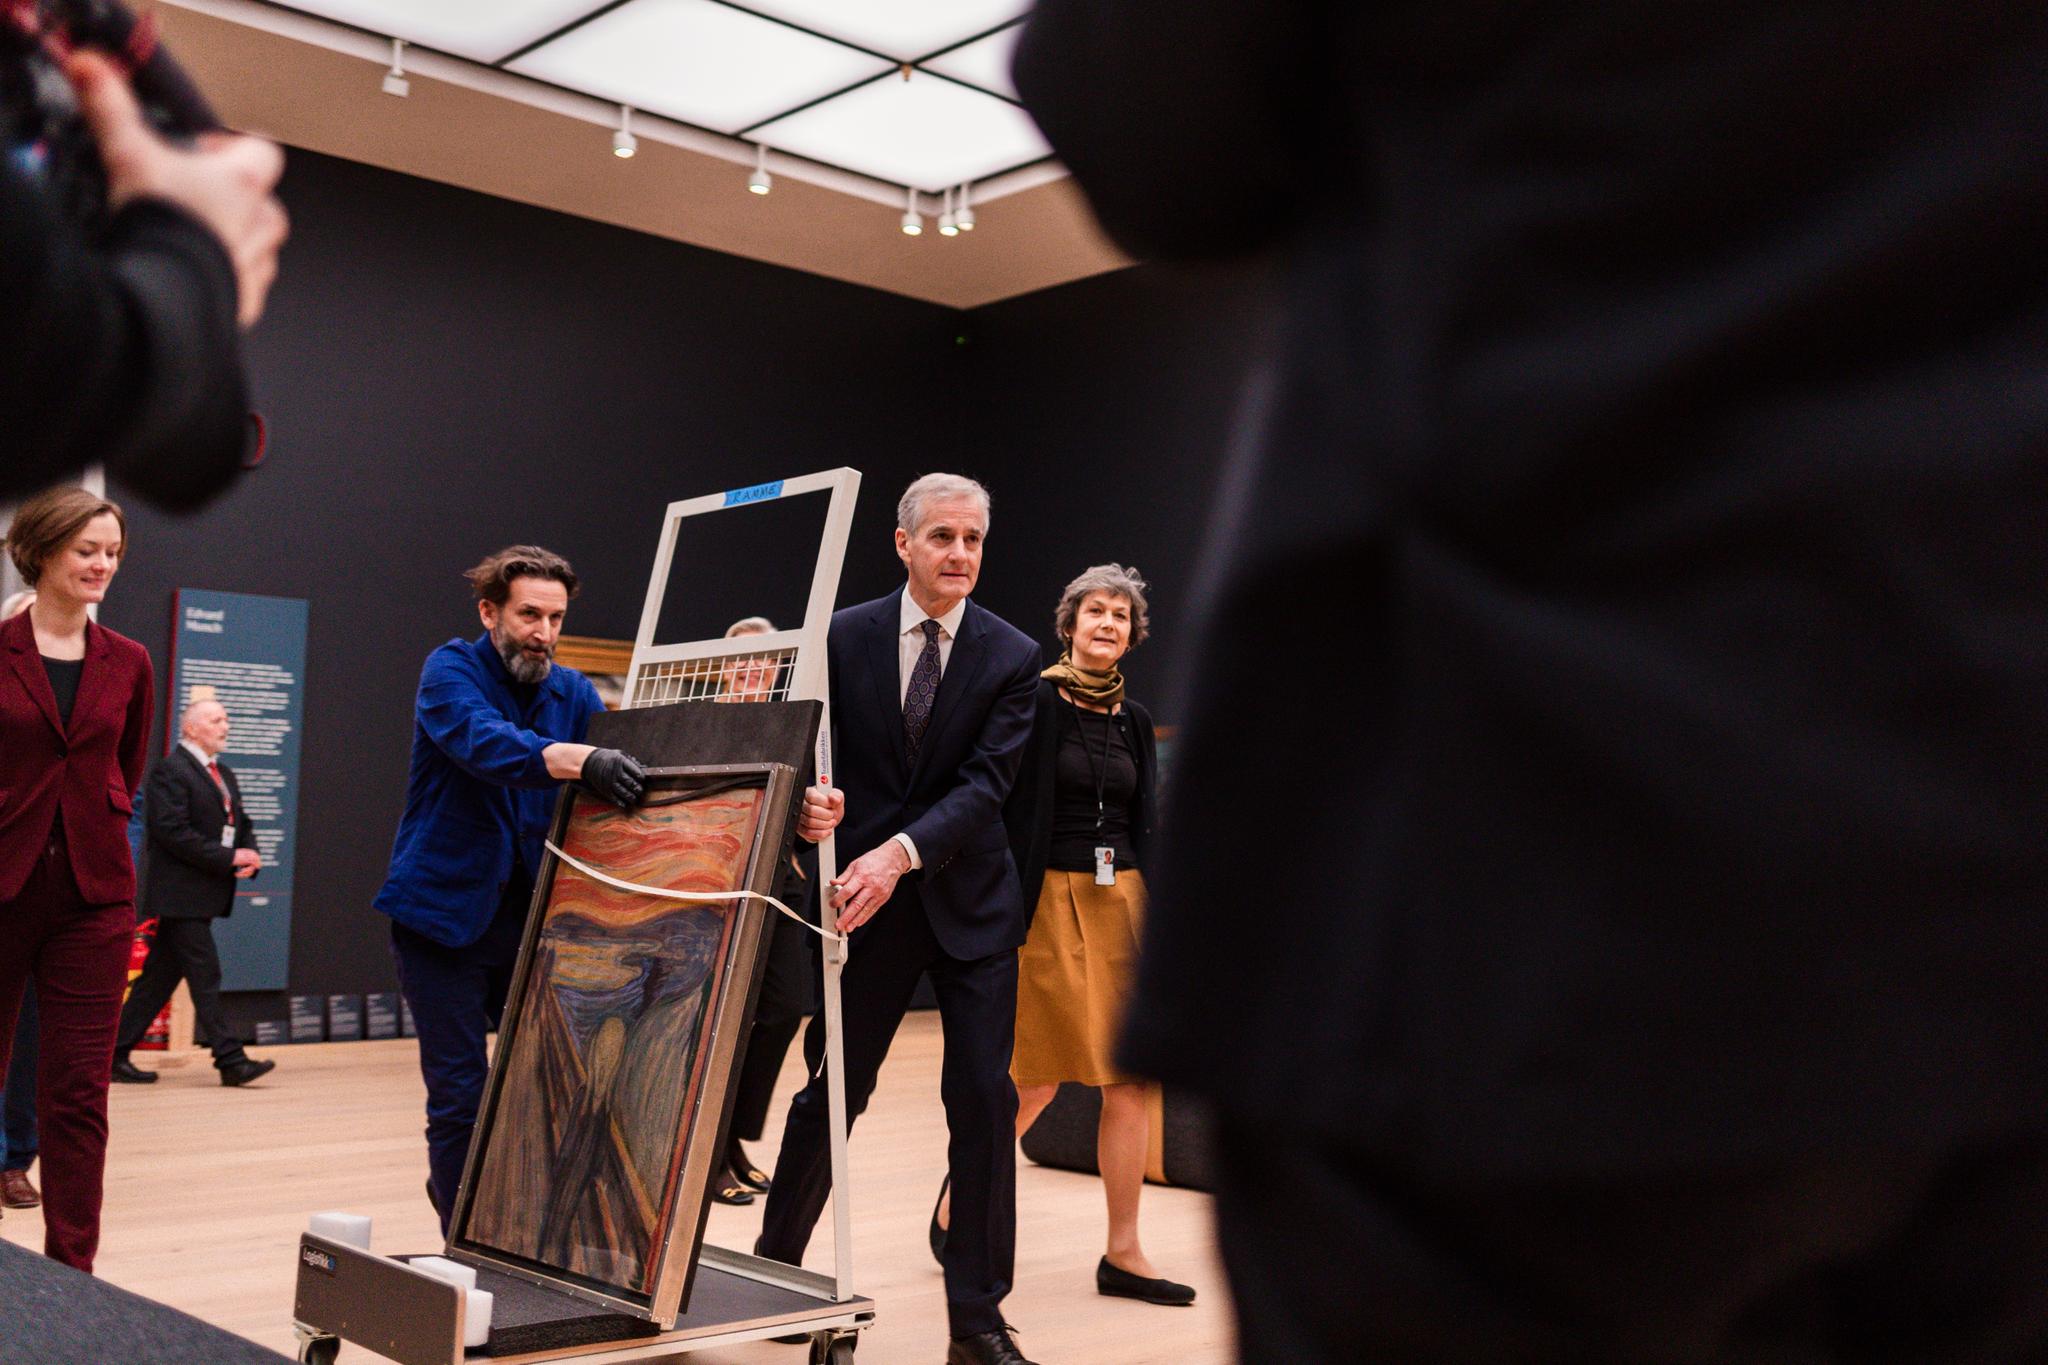 Prime Minister Edward Munch's "Scream" rolled into the National Museum